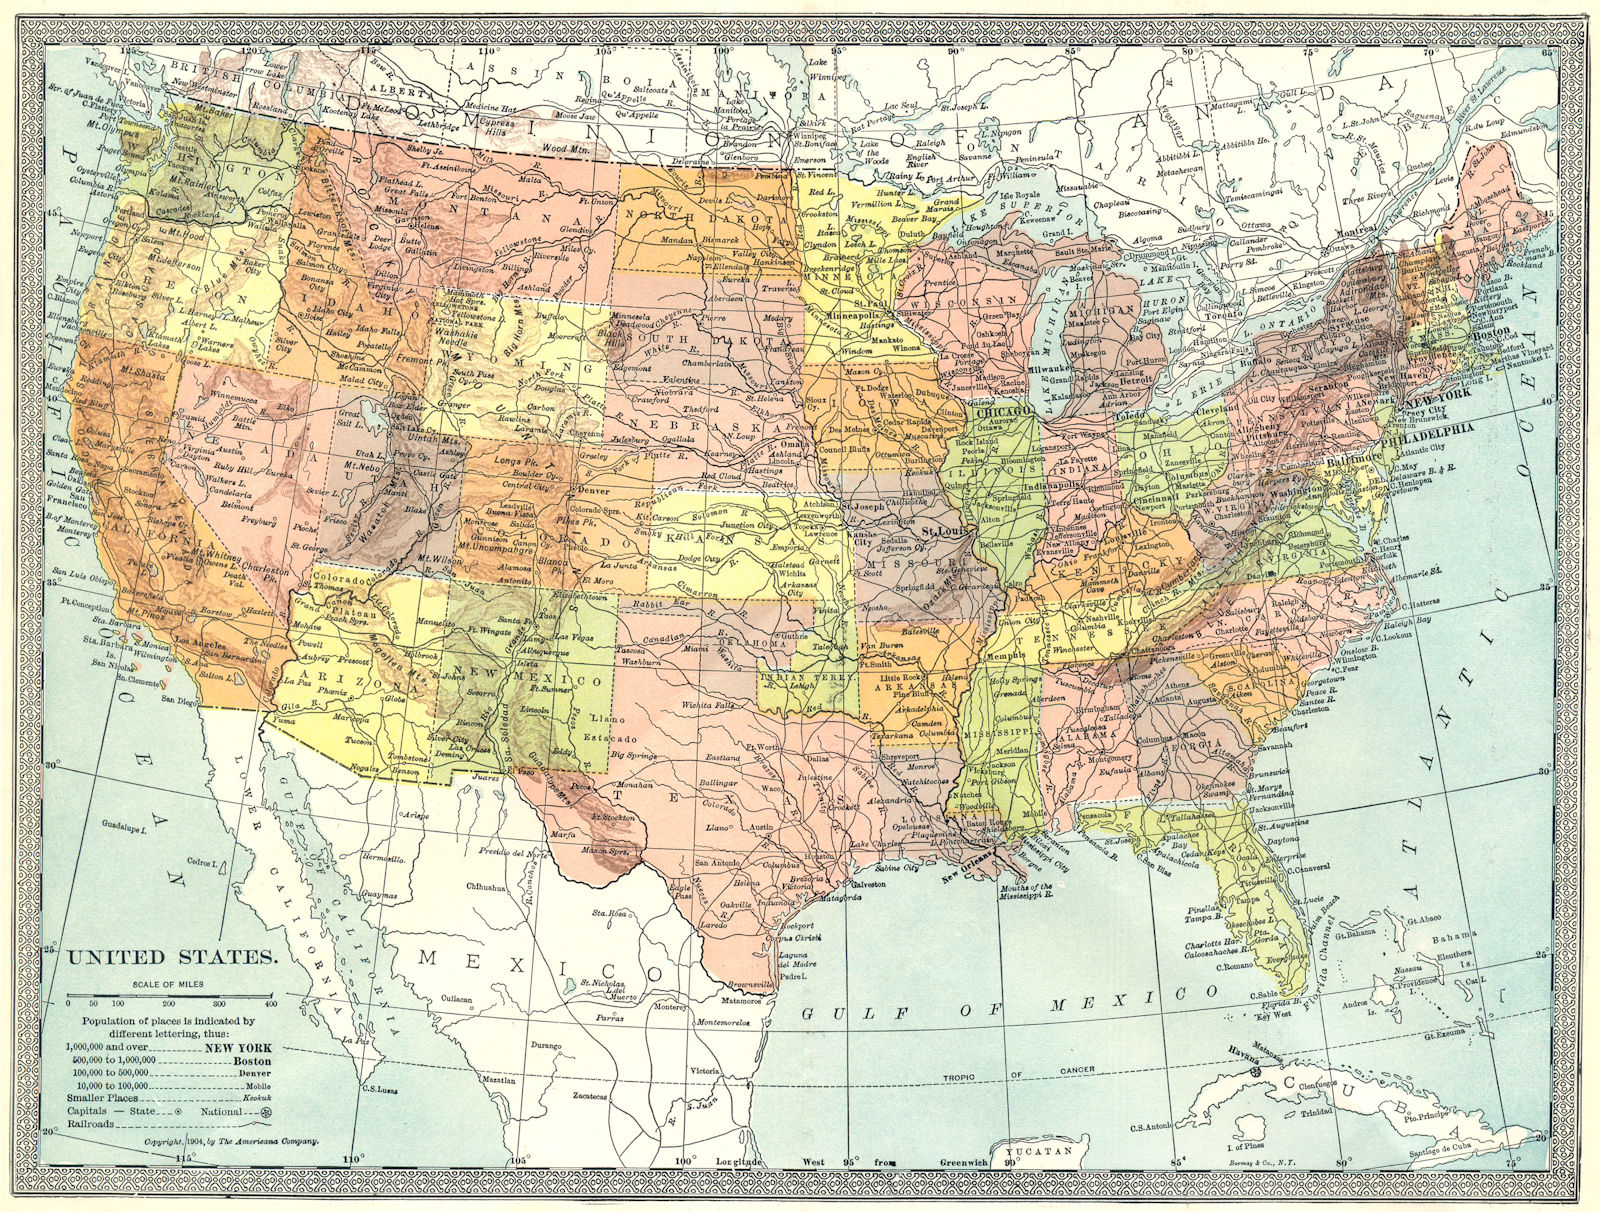 United States. Indian Territory 1907 old antique vintage map plan chart